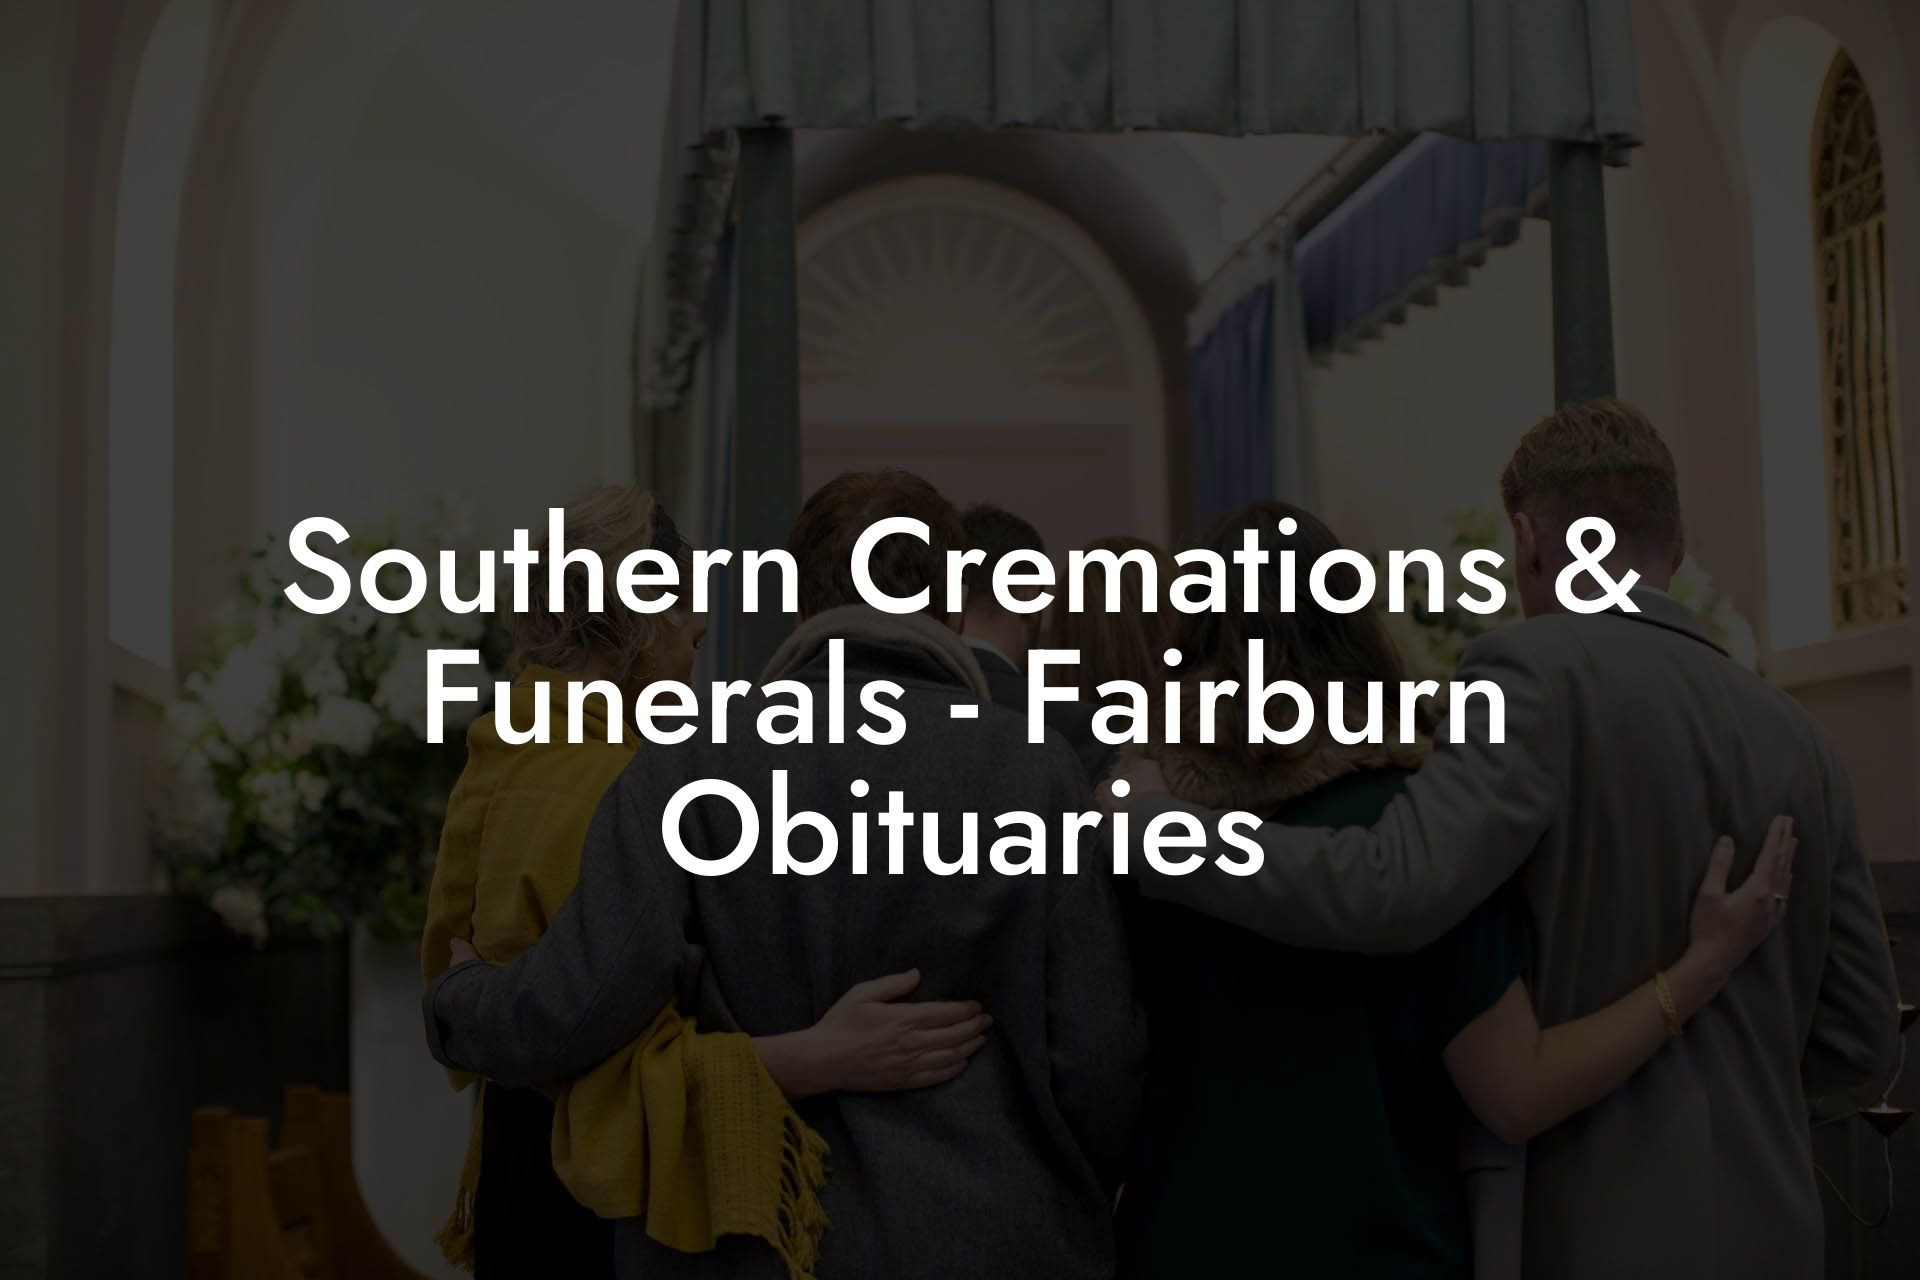 Southern Cremations & Funerals - Fairburn Obituaries